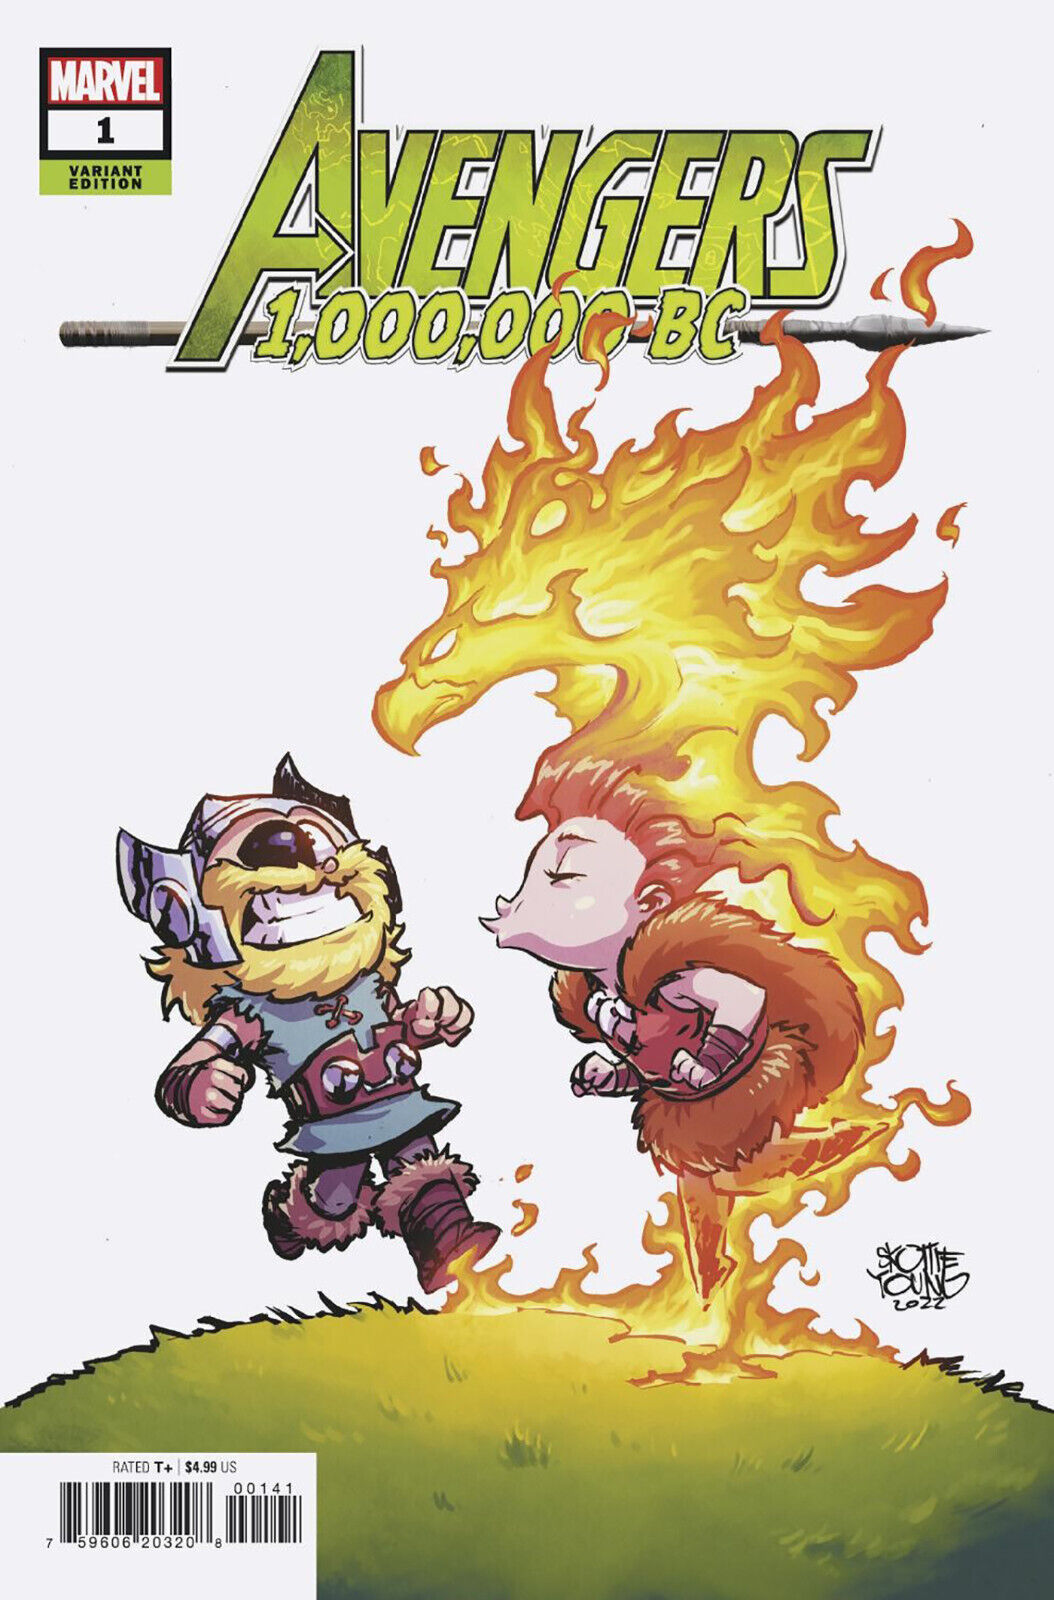 AVENGERS 1,000,000 BC #1 (SKOTTIE YOUNG VARIANT)(2022) COMIC BOOK ~ Marvel